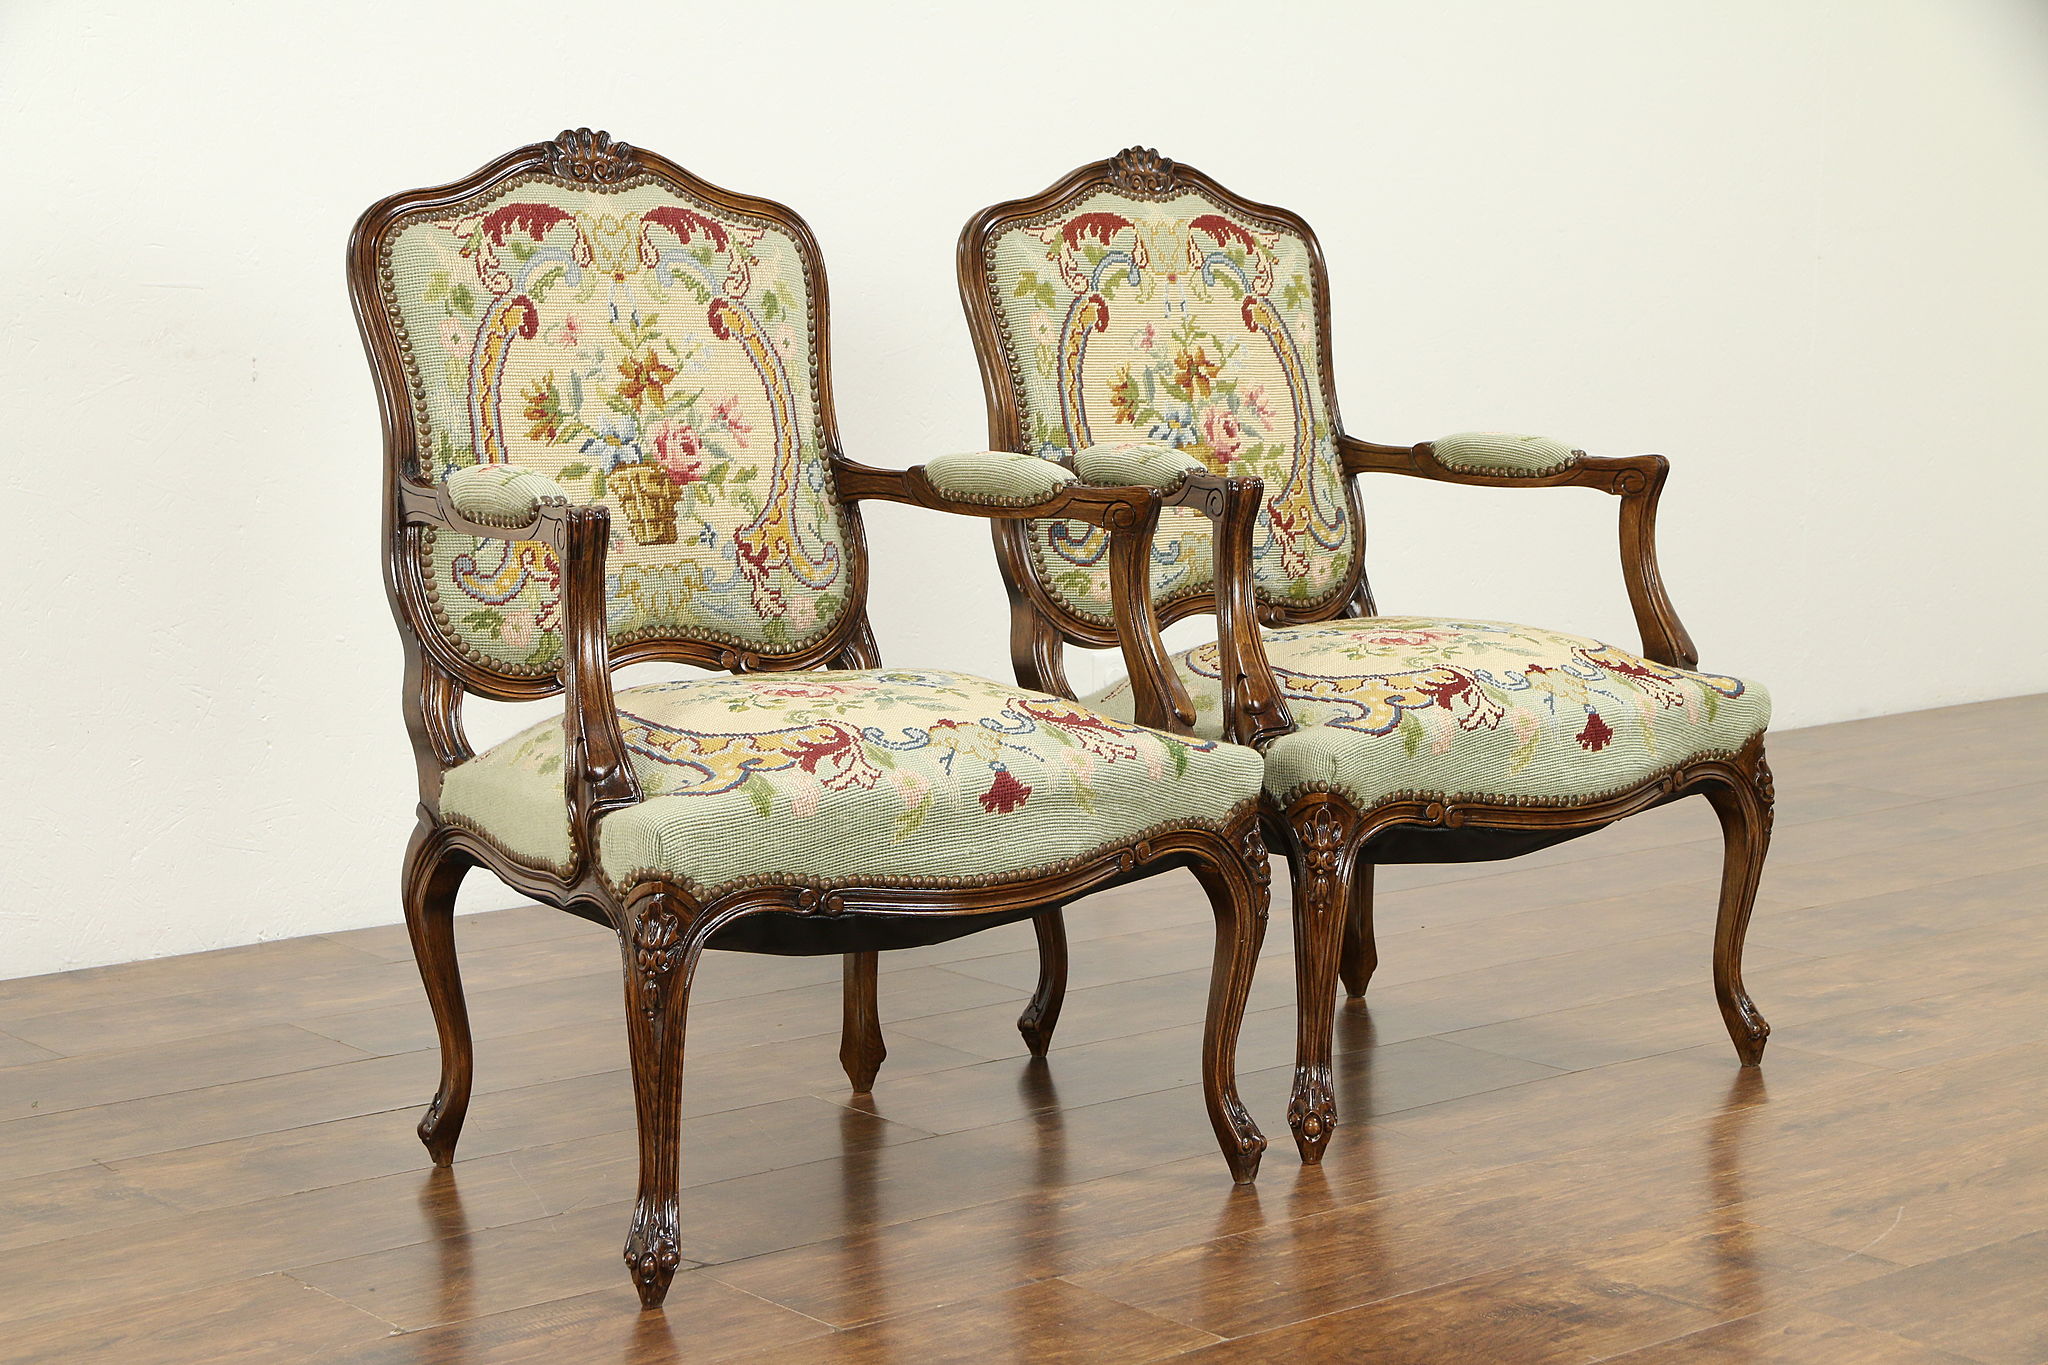 19th century French Louis XIV style armchair with needlepoint.